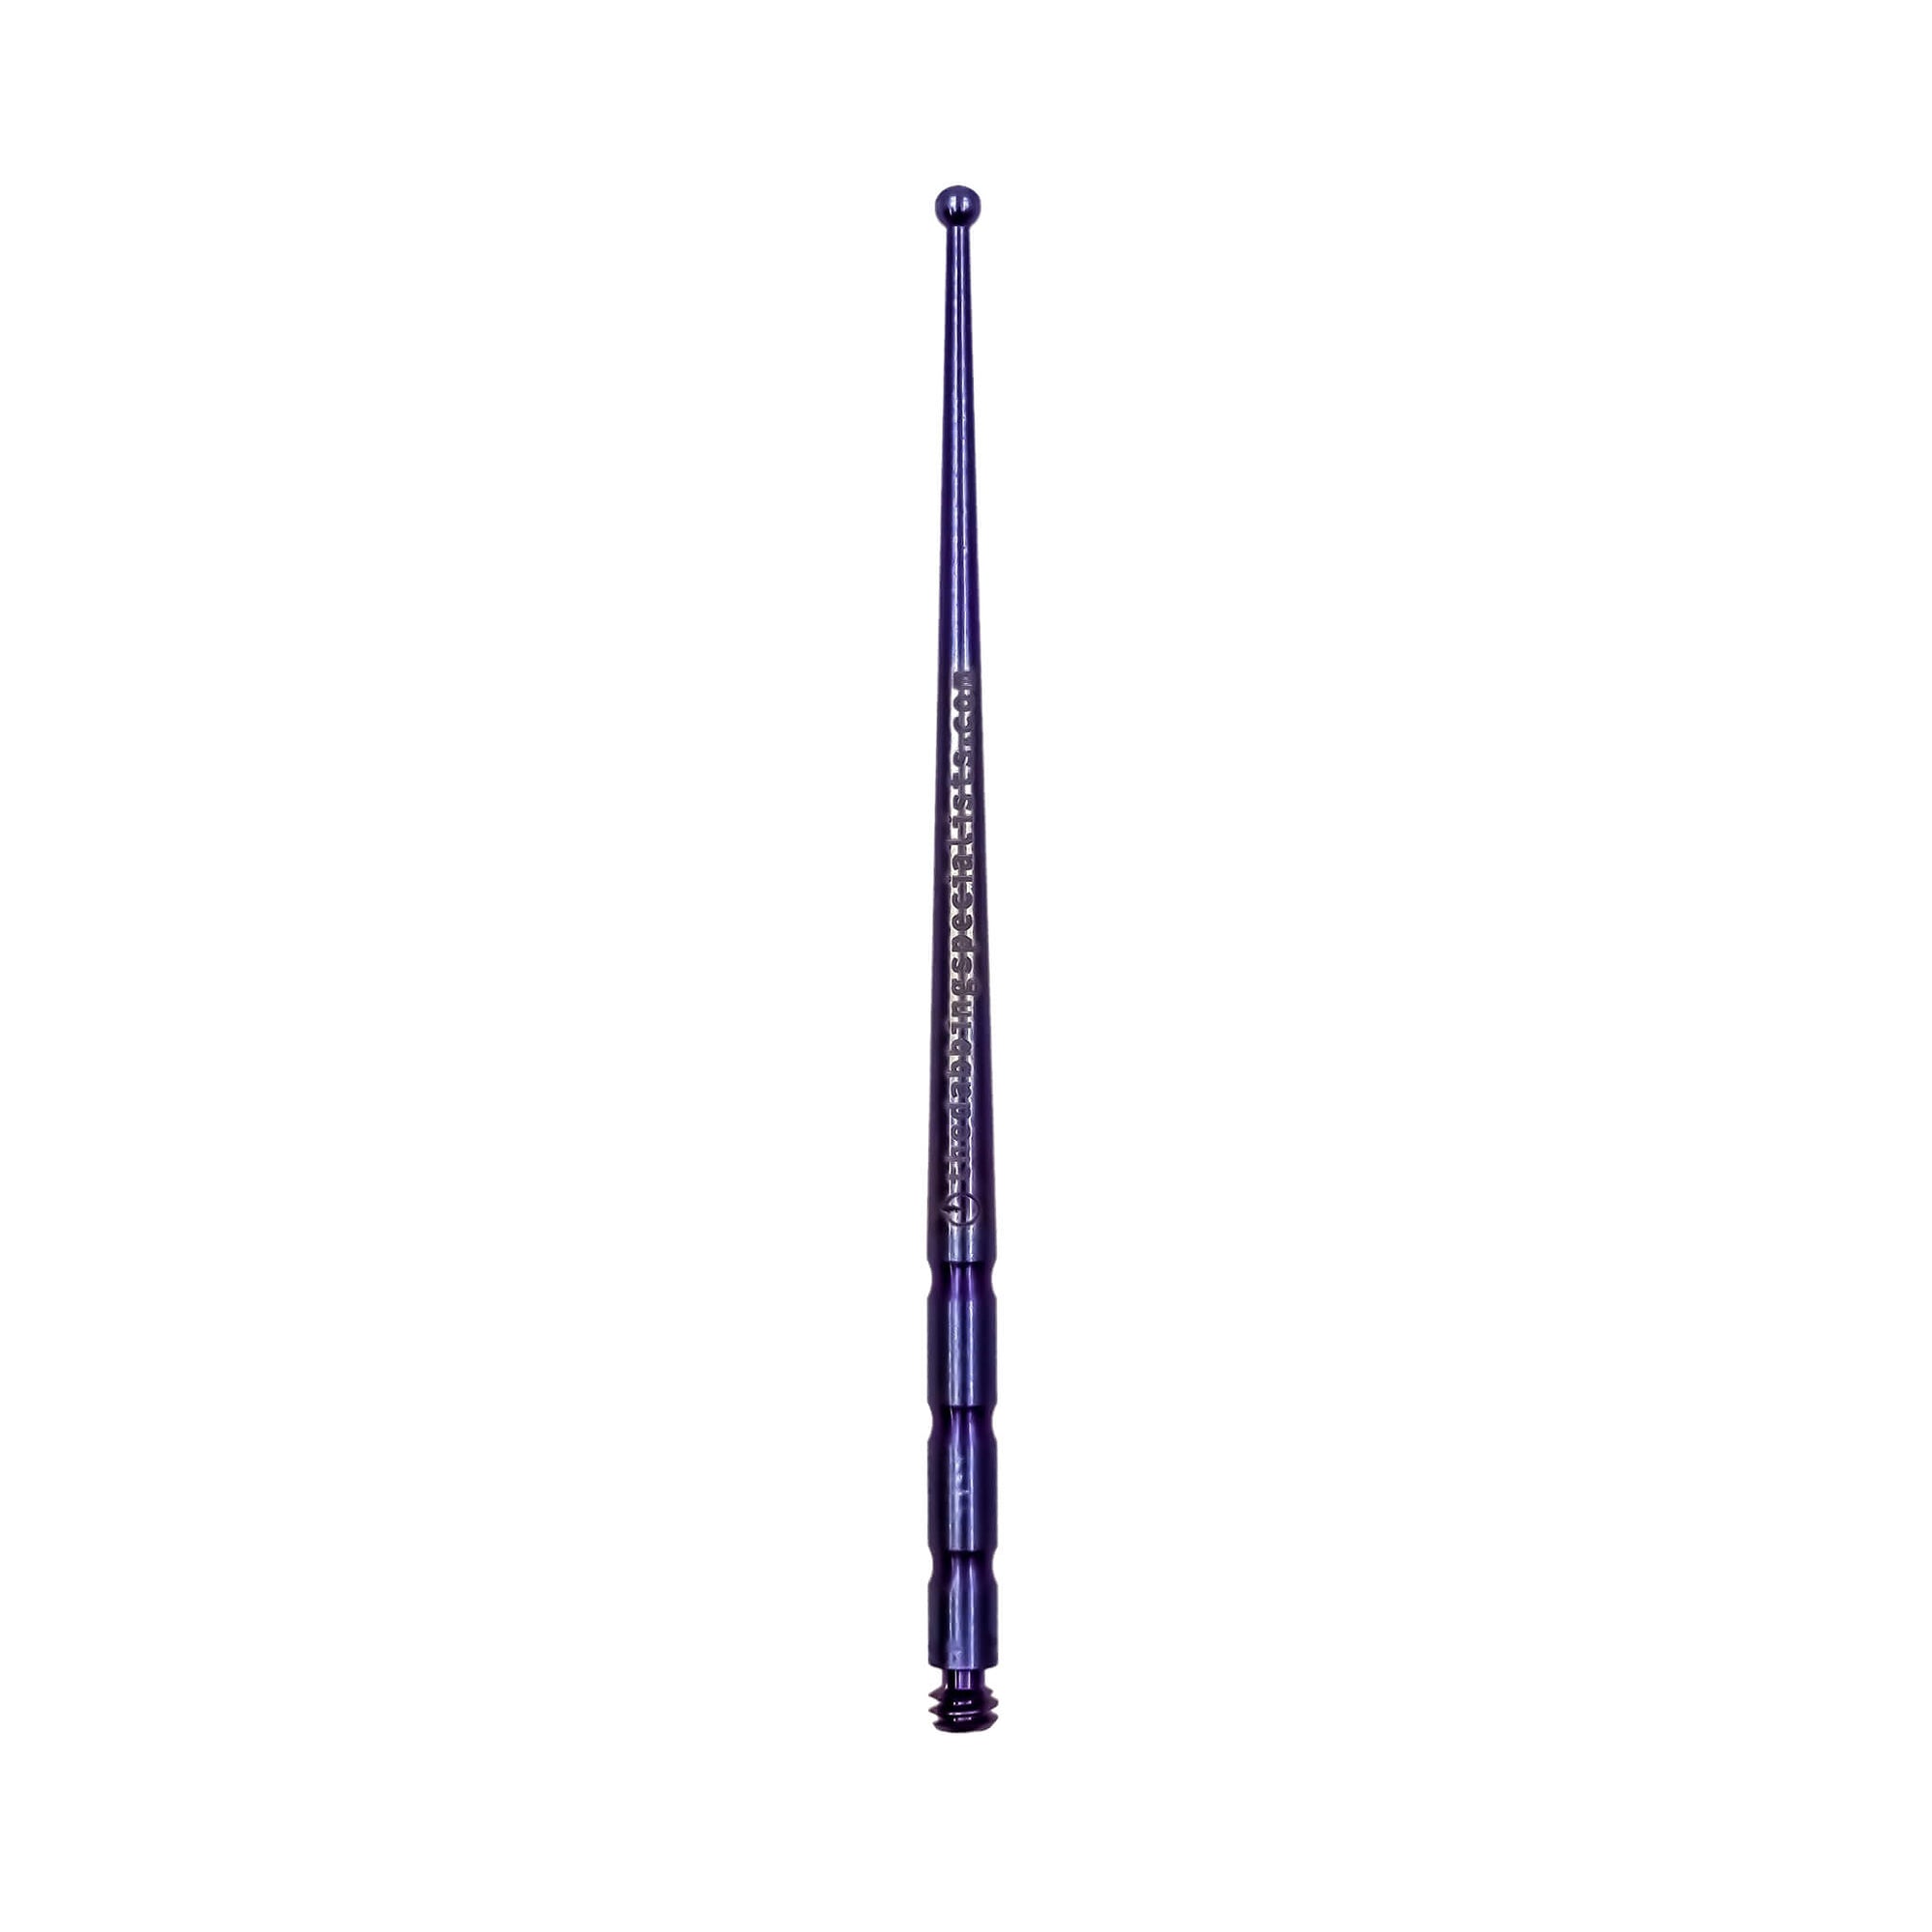 Titanium Dab Stick - Scoop Ball | Anodized Purple-Blue Scoop Ball View | the dabbing specialists